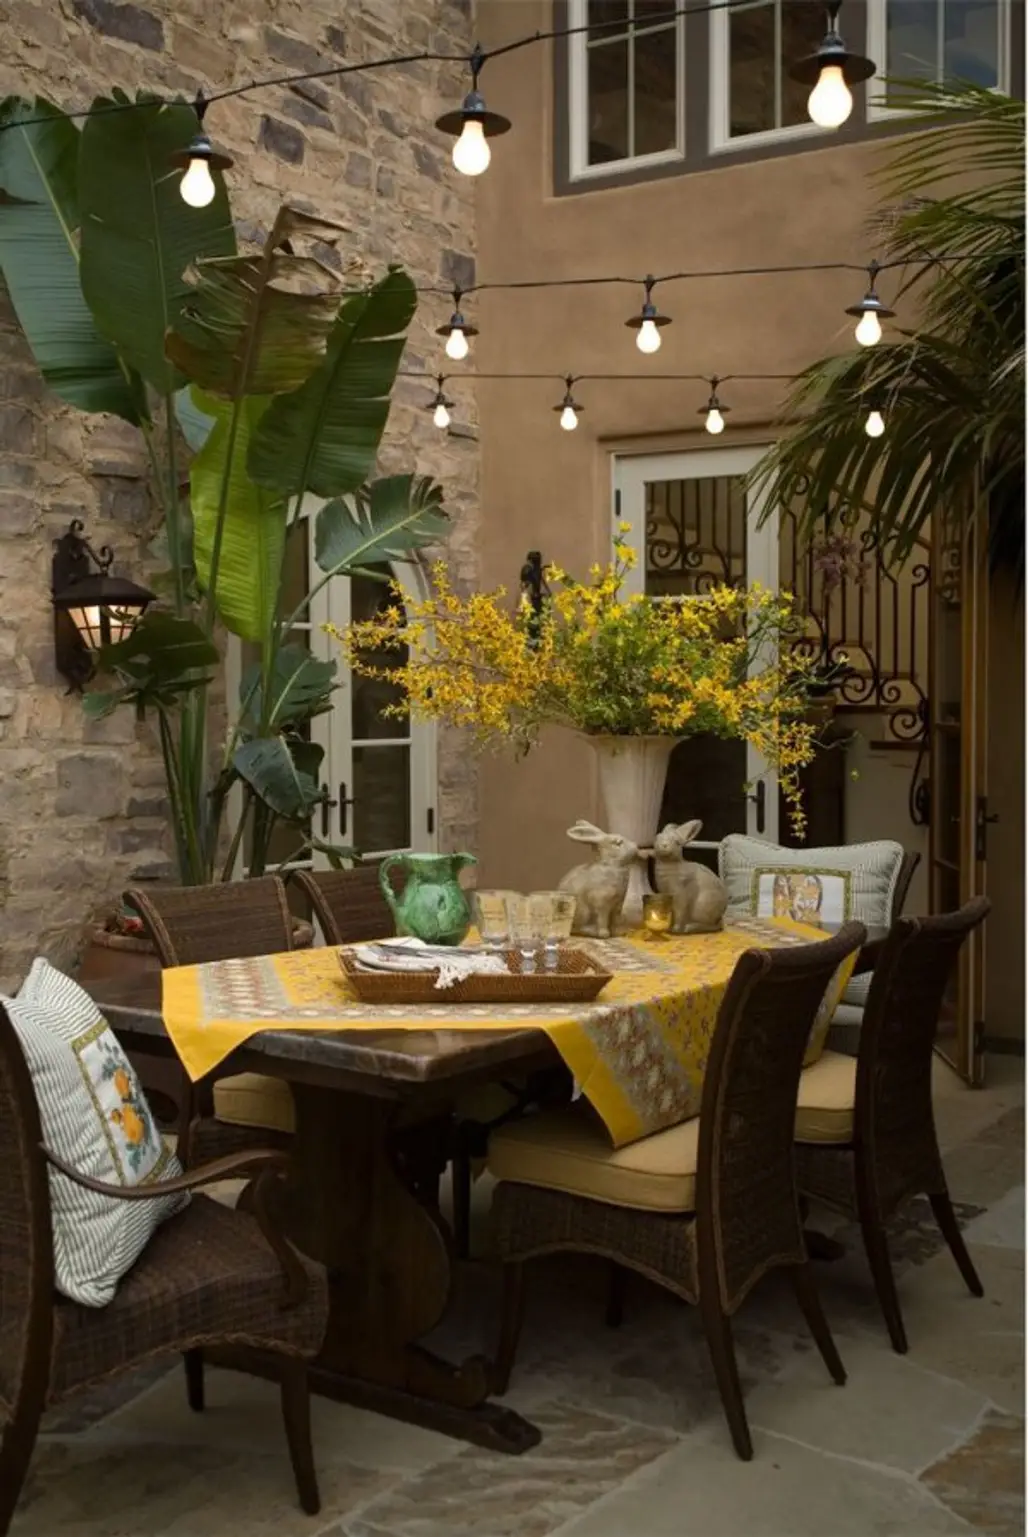 Even Small Spaces Are Ideal for Dinner Parties Outdoors